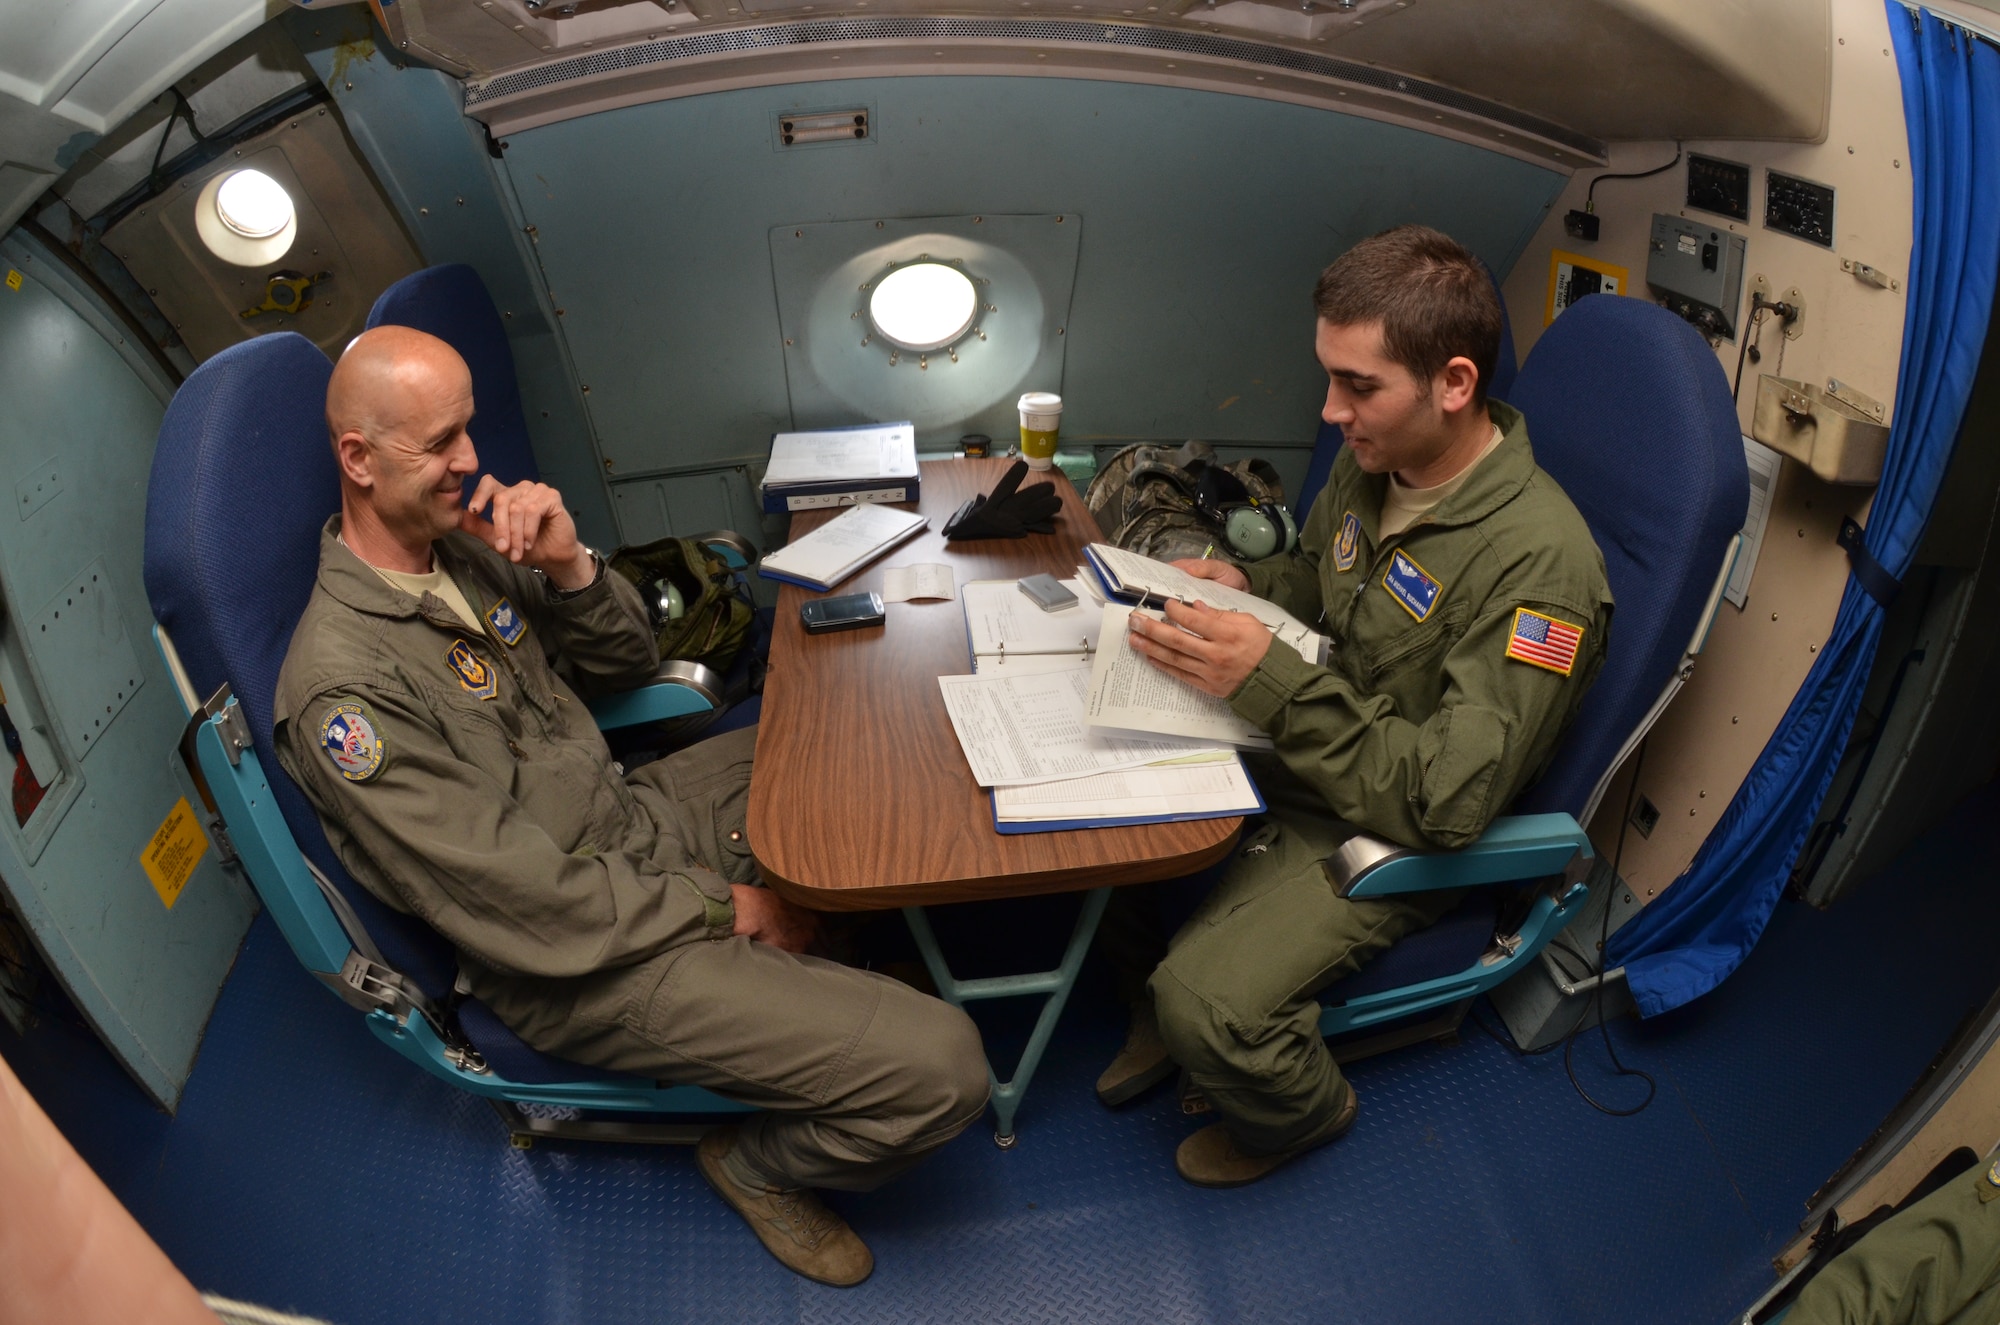 MSgt. Christopher Hellyar trains SrA. Michael Buchanan, both 337th Airlift Squadron Loadmasters, on proper procedures just before the C-5 Galaxy aircraft departs Westover for a three day humantiarian aid mission to Nicaragua, June 9, 2014. (U.S. Air Force photo/SSgt. Kelly Goonan)